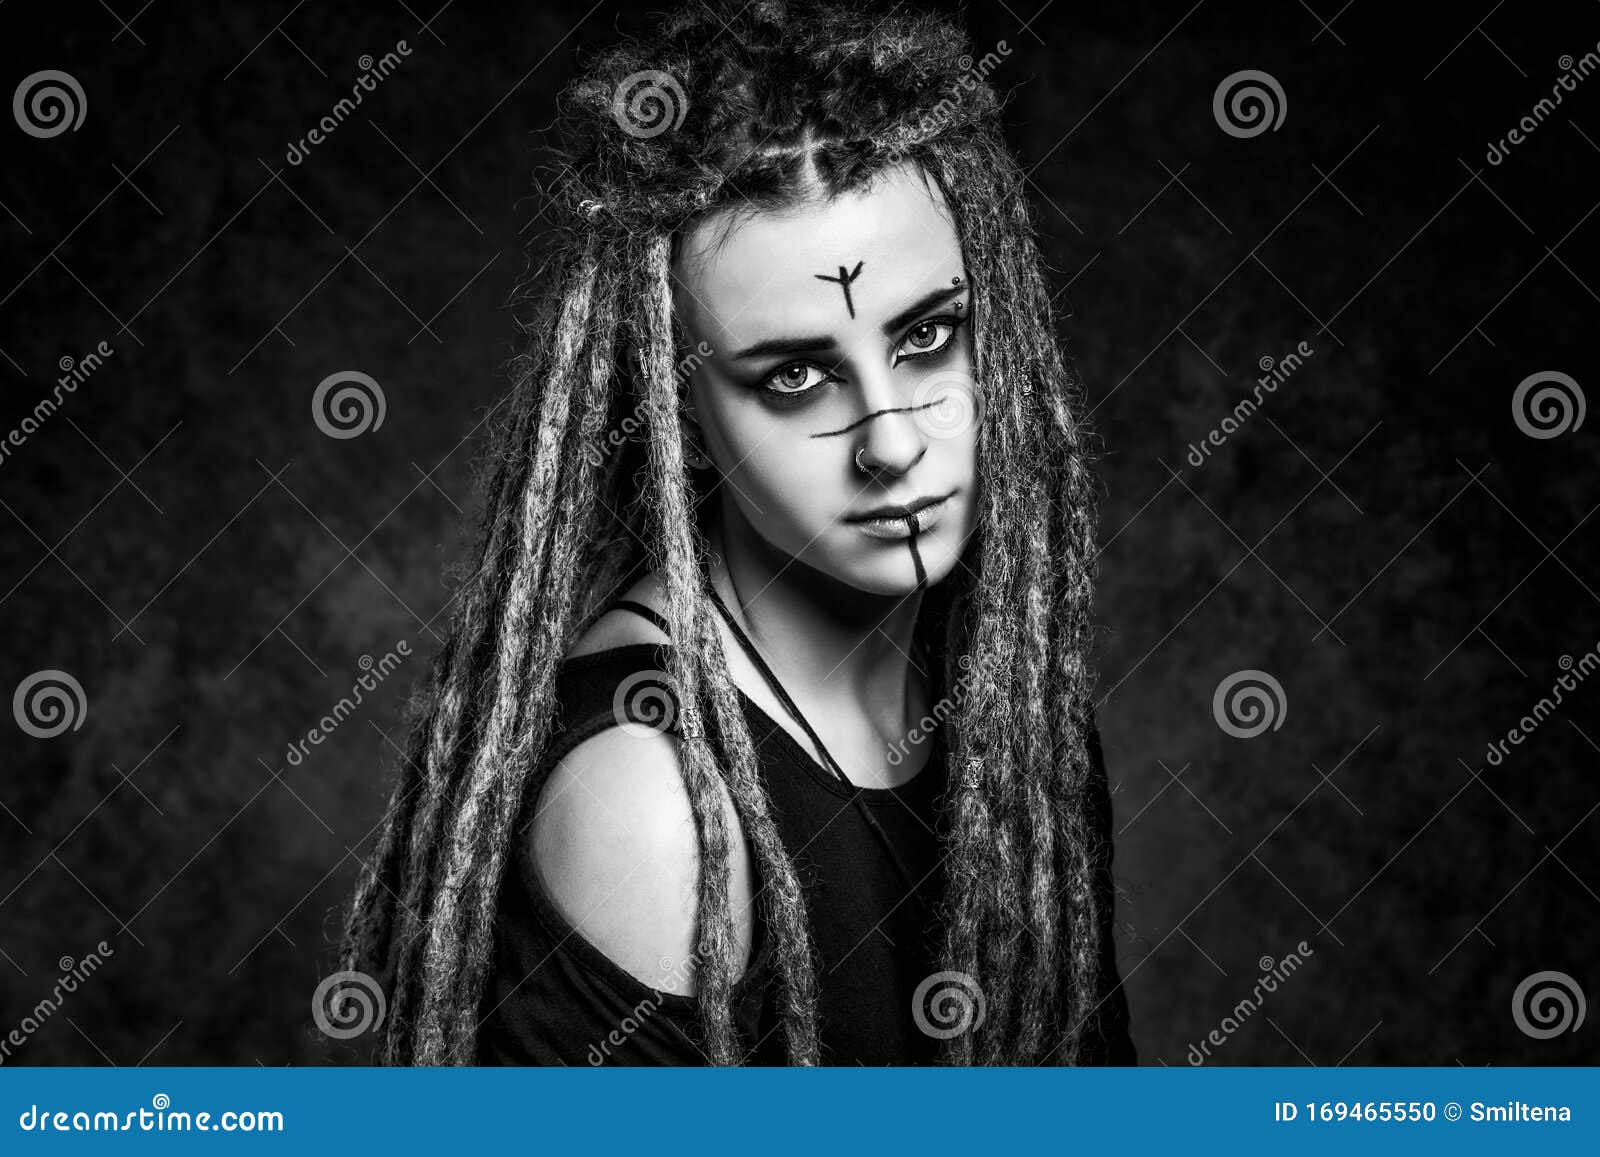 Black and White Portrait of a Young Woman with Dreadlocks Against Dark ...